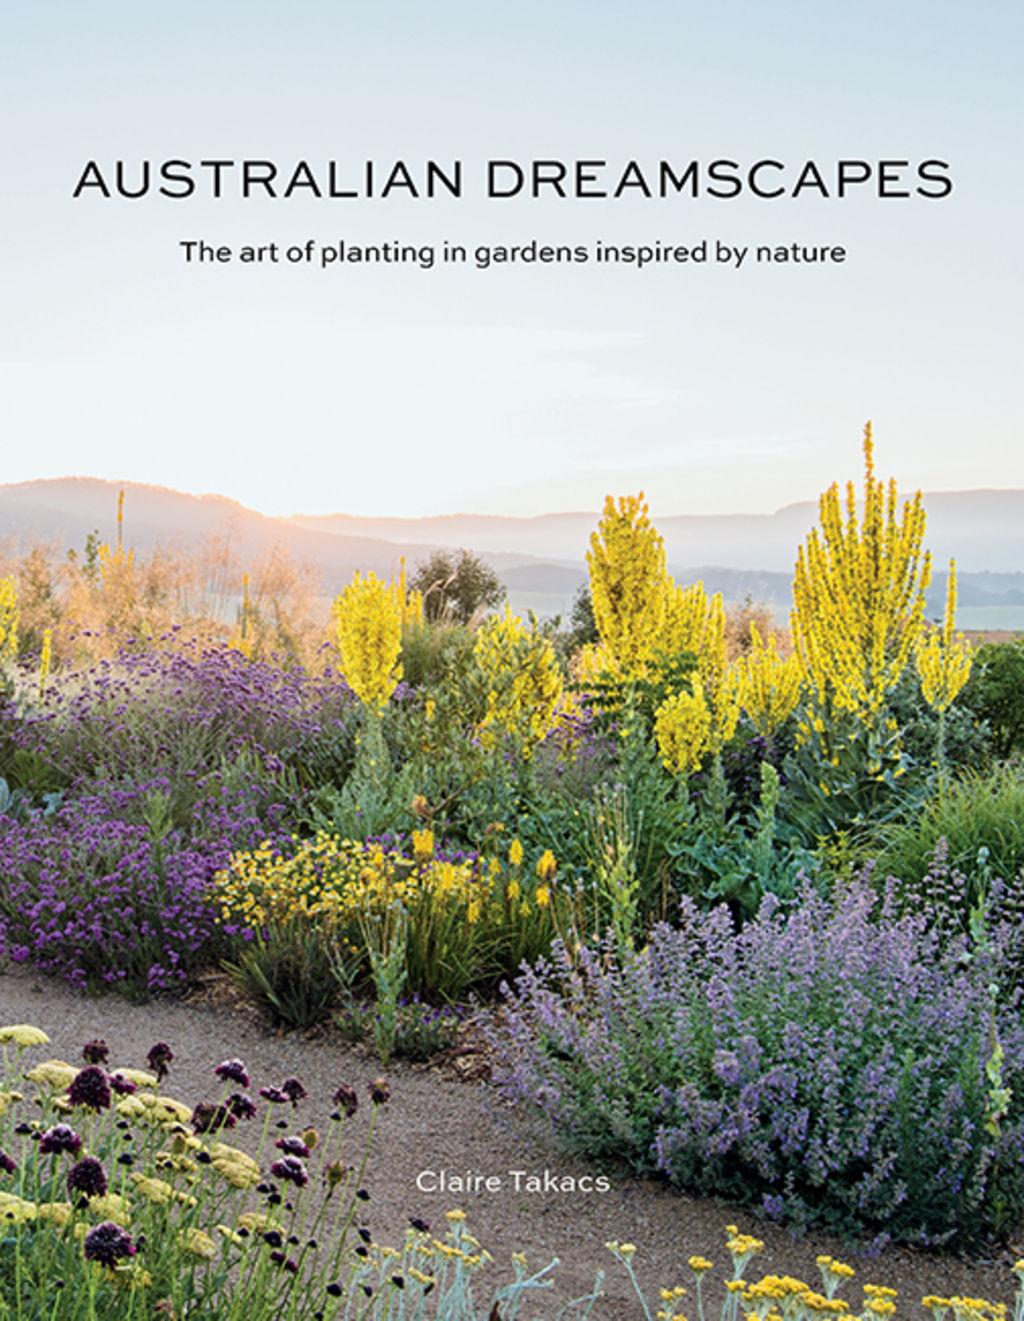 Australian Dreamscapes by Claire Takacs. Photo: Hardie Grant.